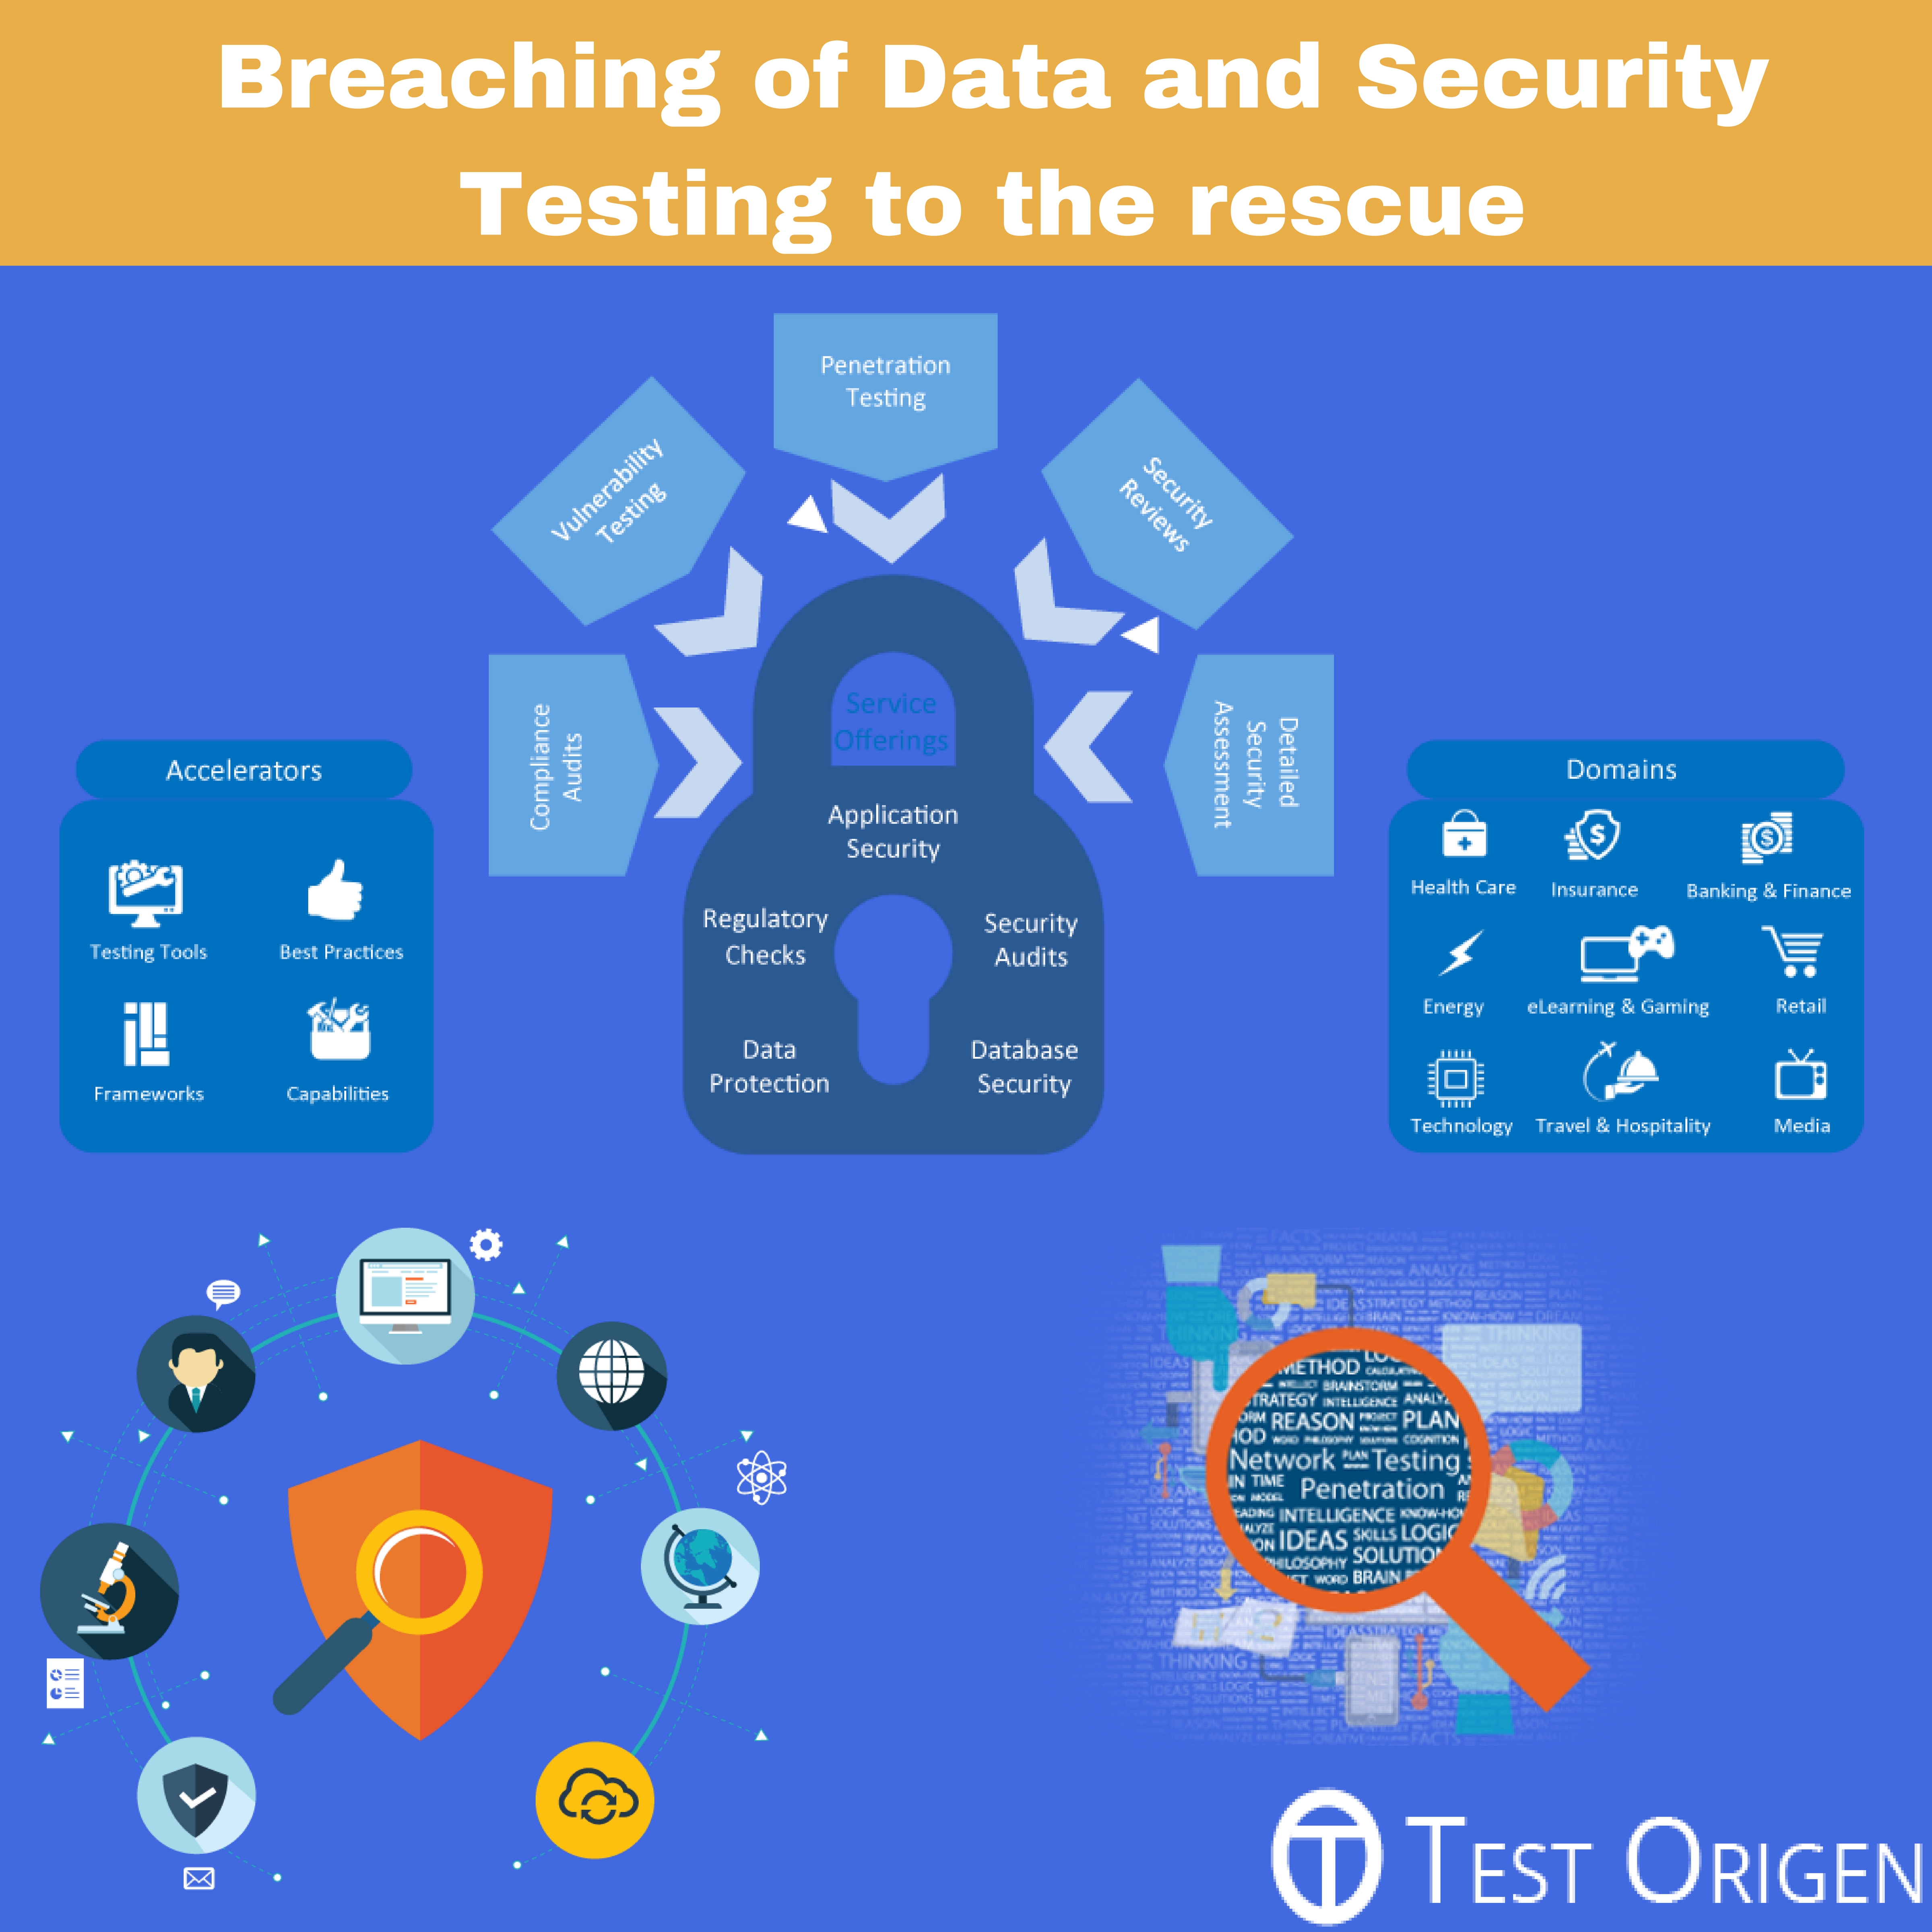 Breaching of Data and Security Testing to the rescue